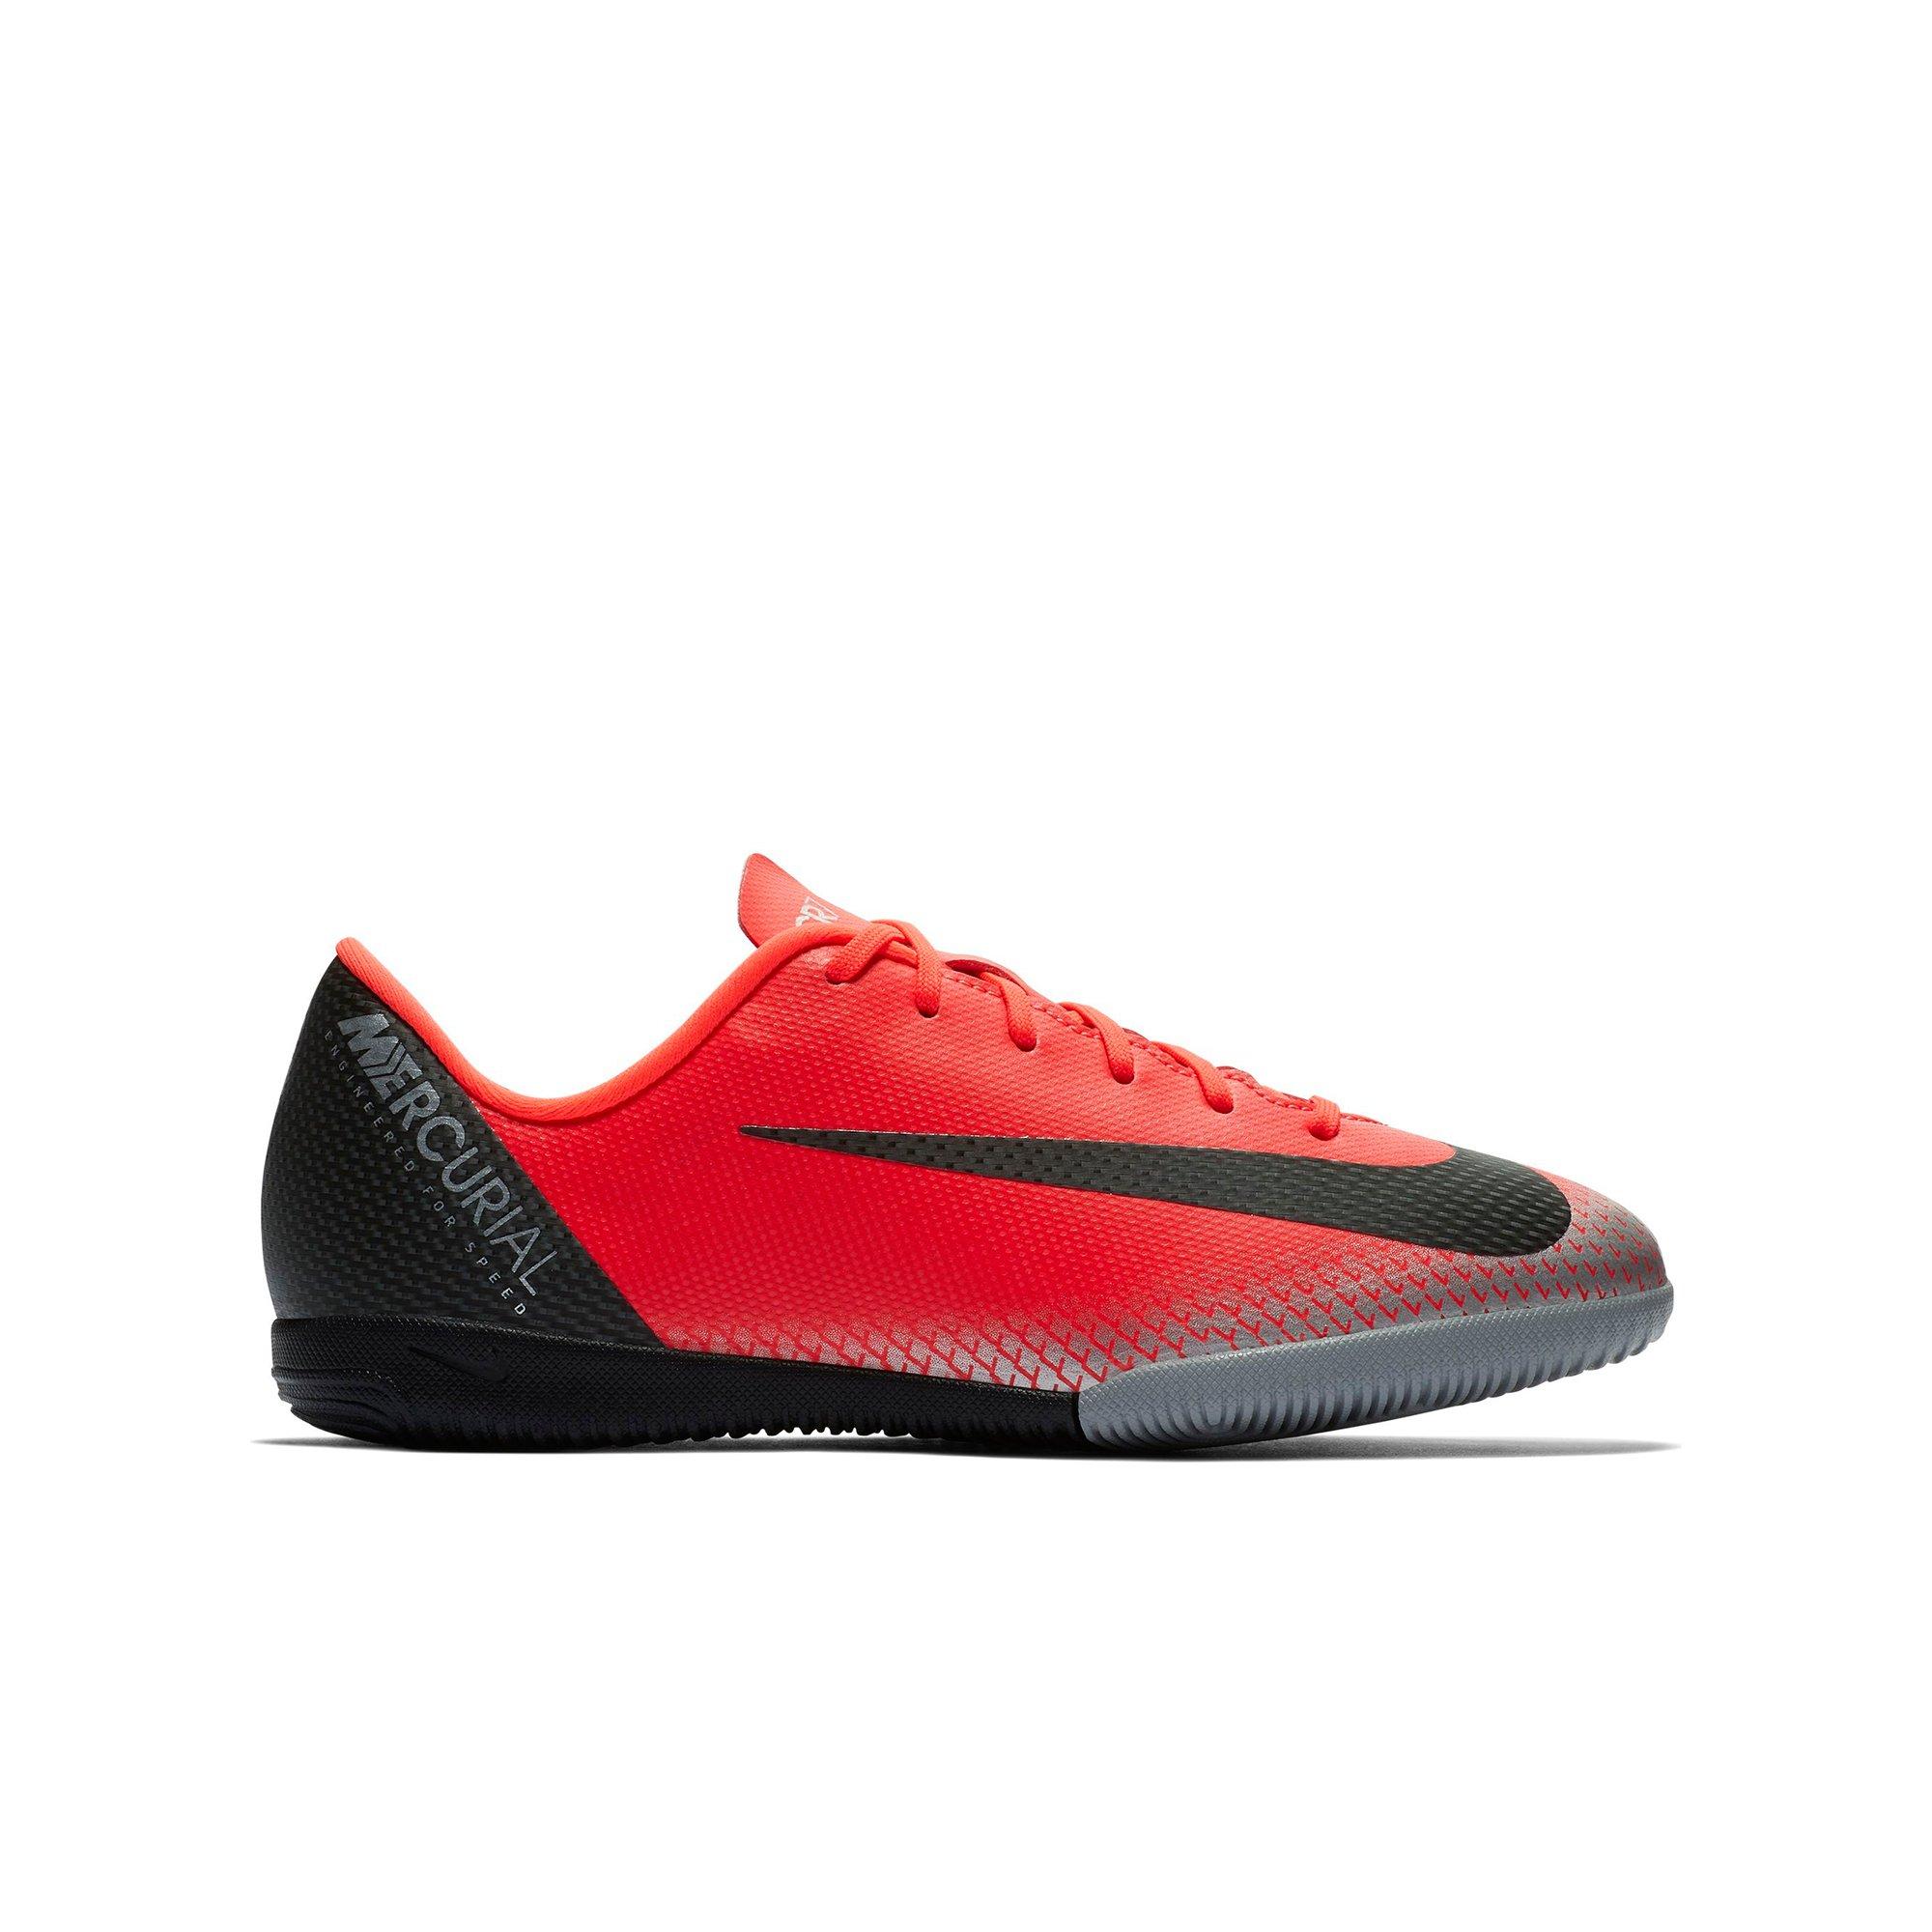 red nike indoor soccer shoes